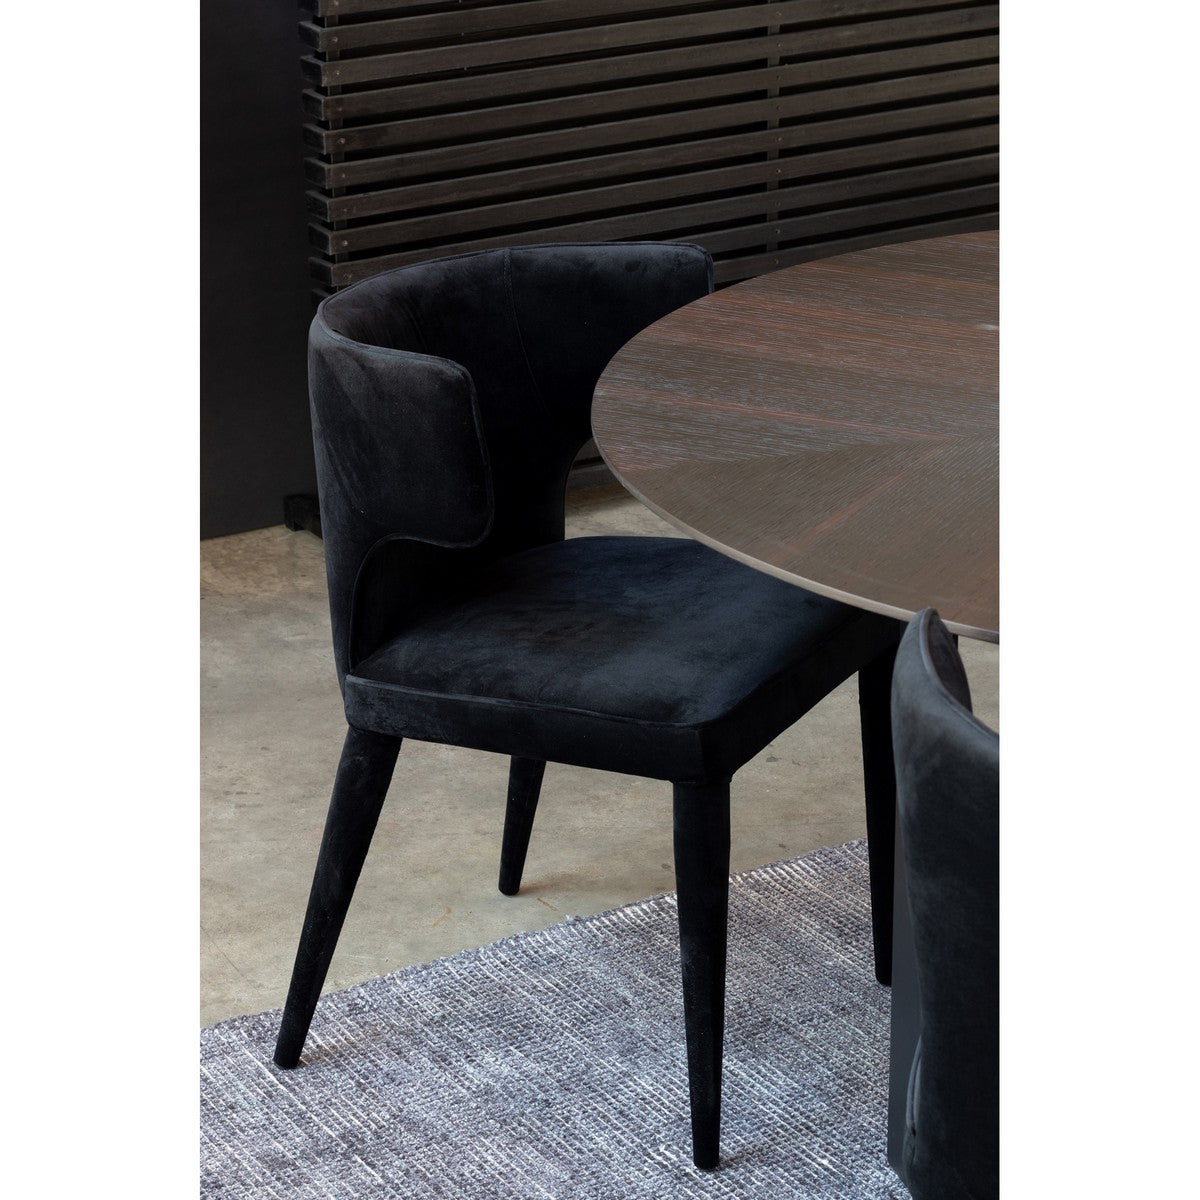 Moe's Home Collection Jennaya Dining Chair Black - EH-1103-02 - Moe's Home Collection - Dining Chairs - Minimal And Modern - 1